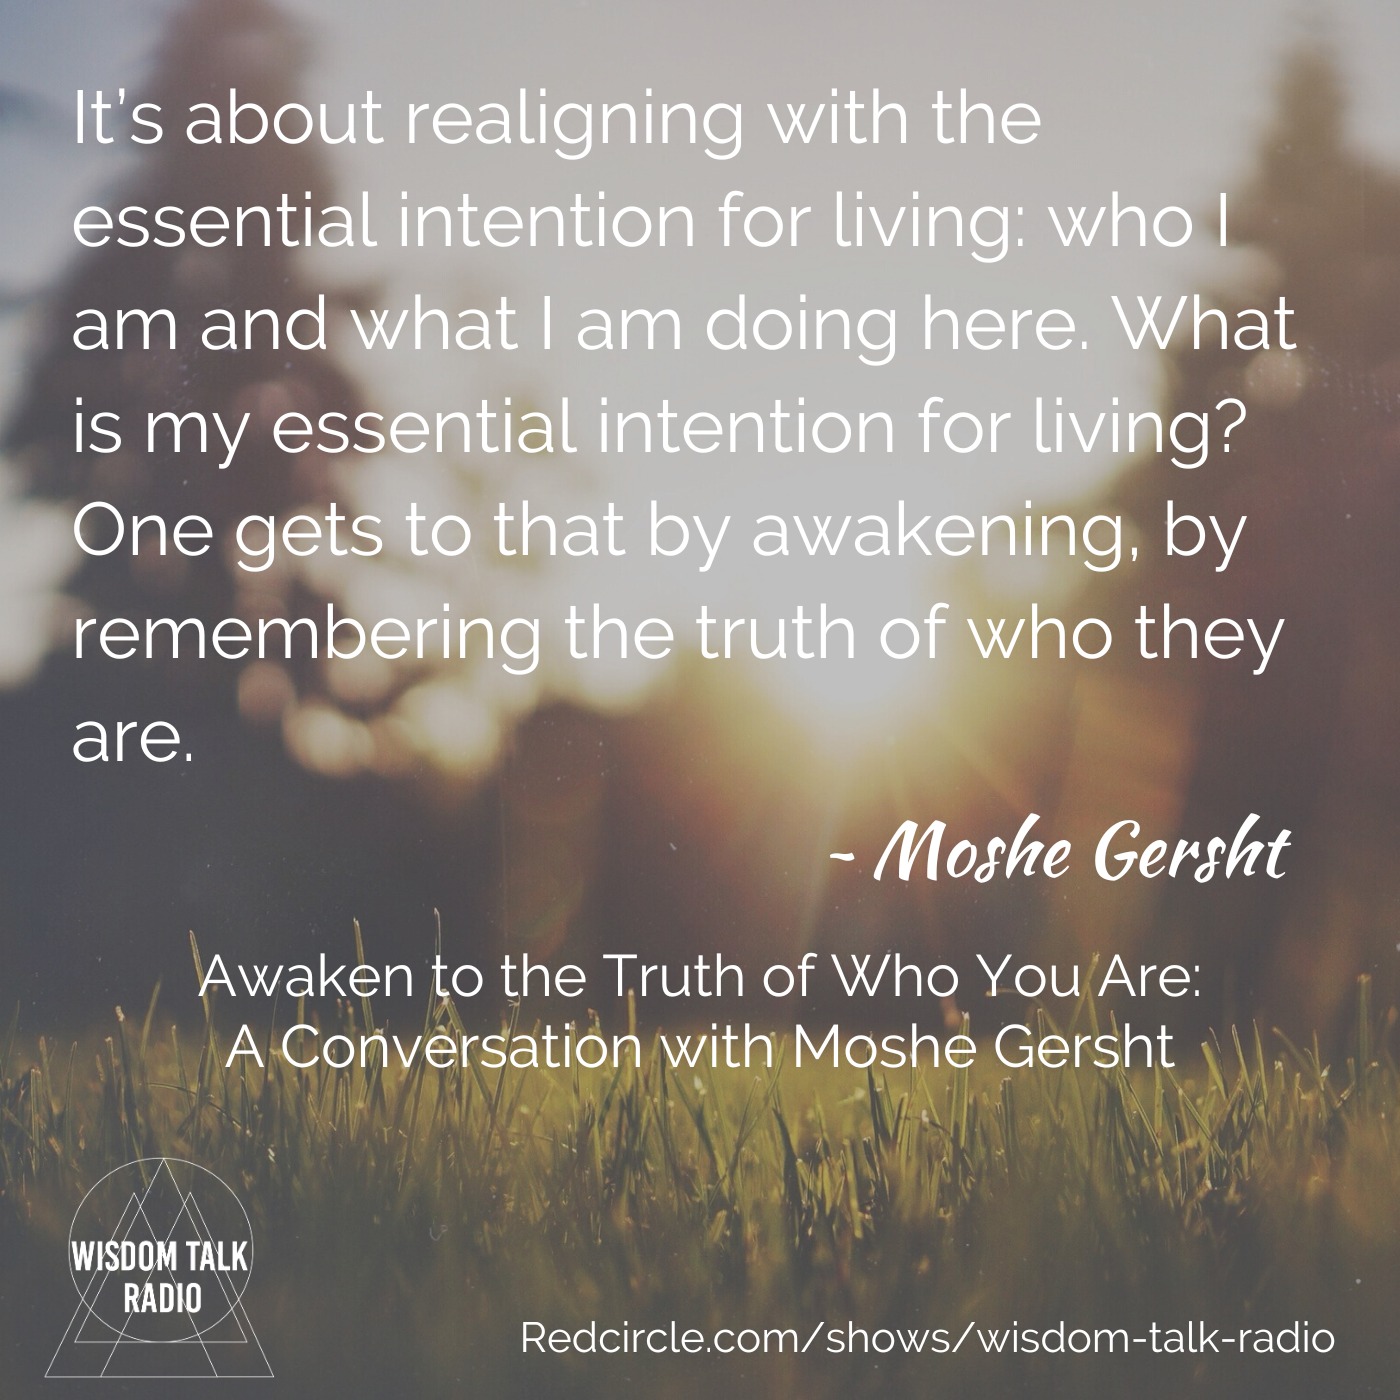 Awaken to the Truth of Who You Are: a Conversation with Moshe Gersht